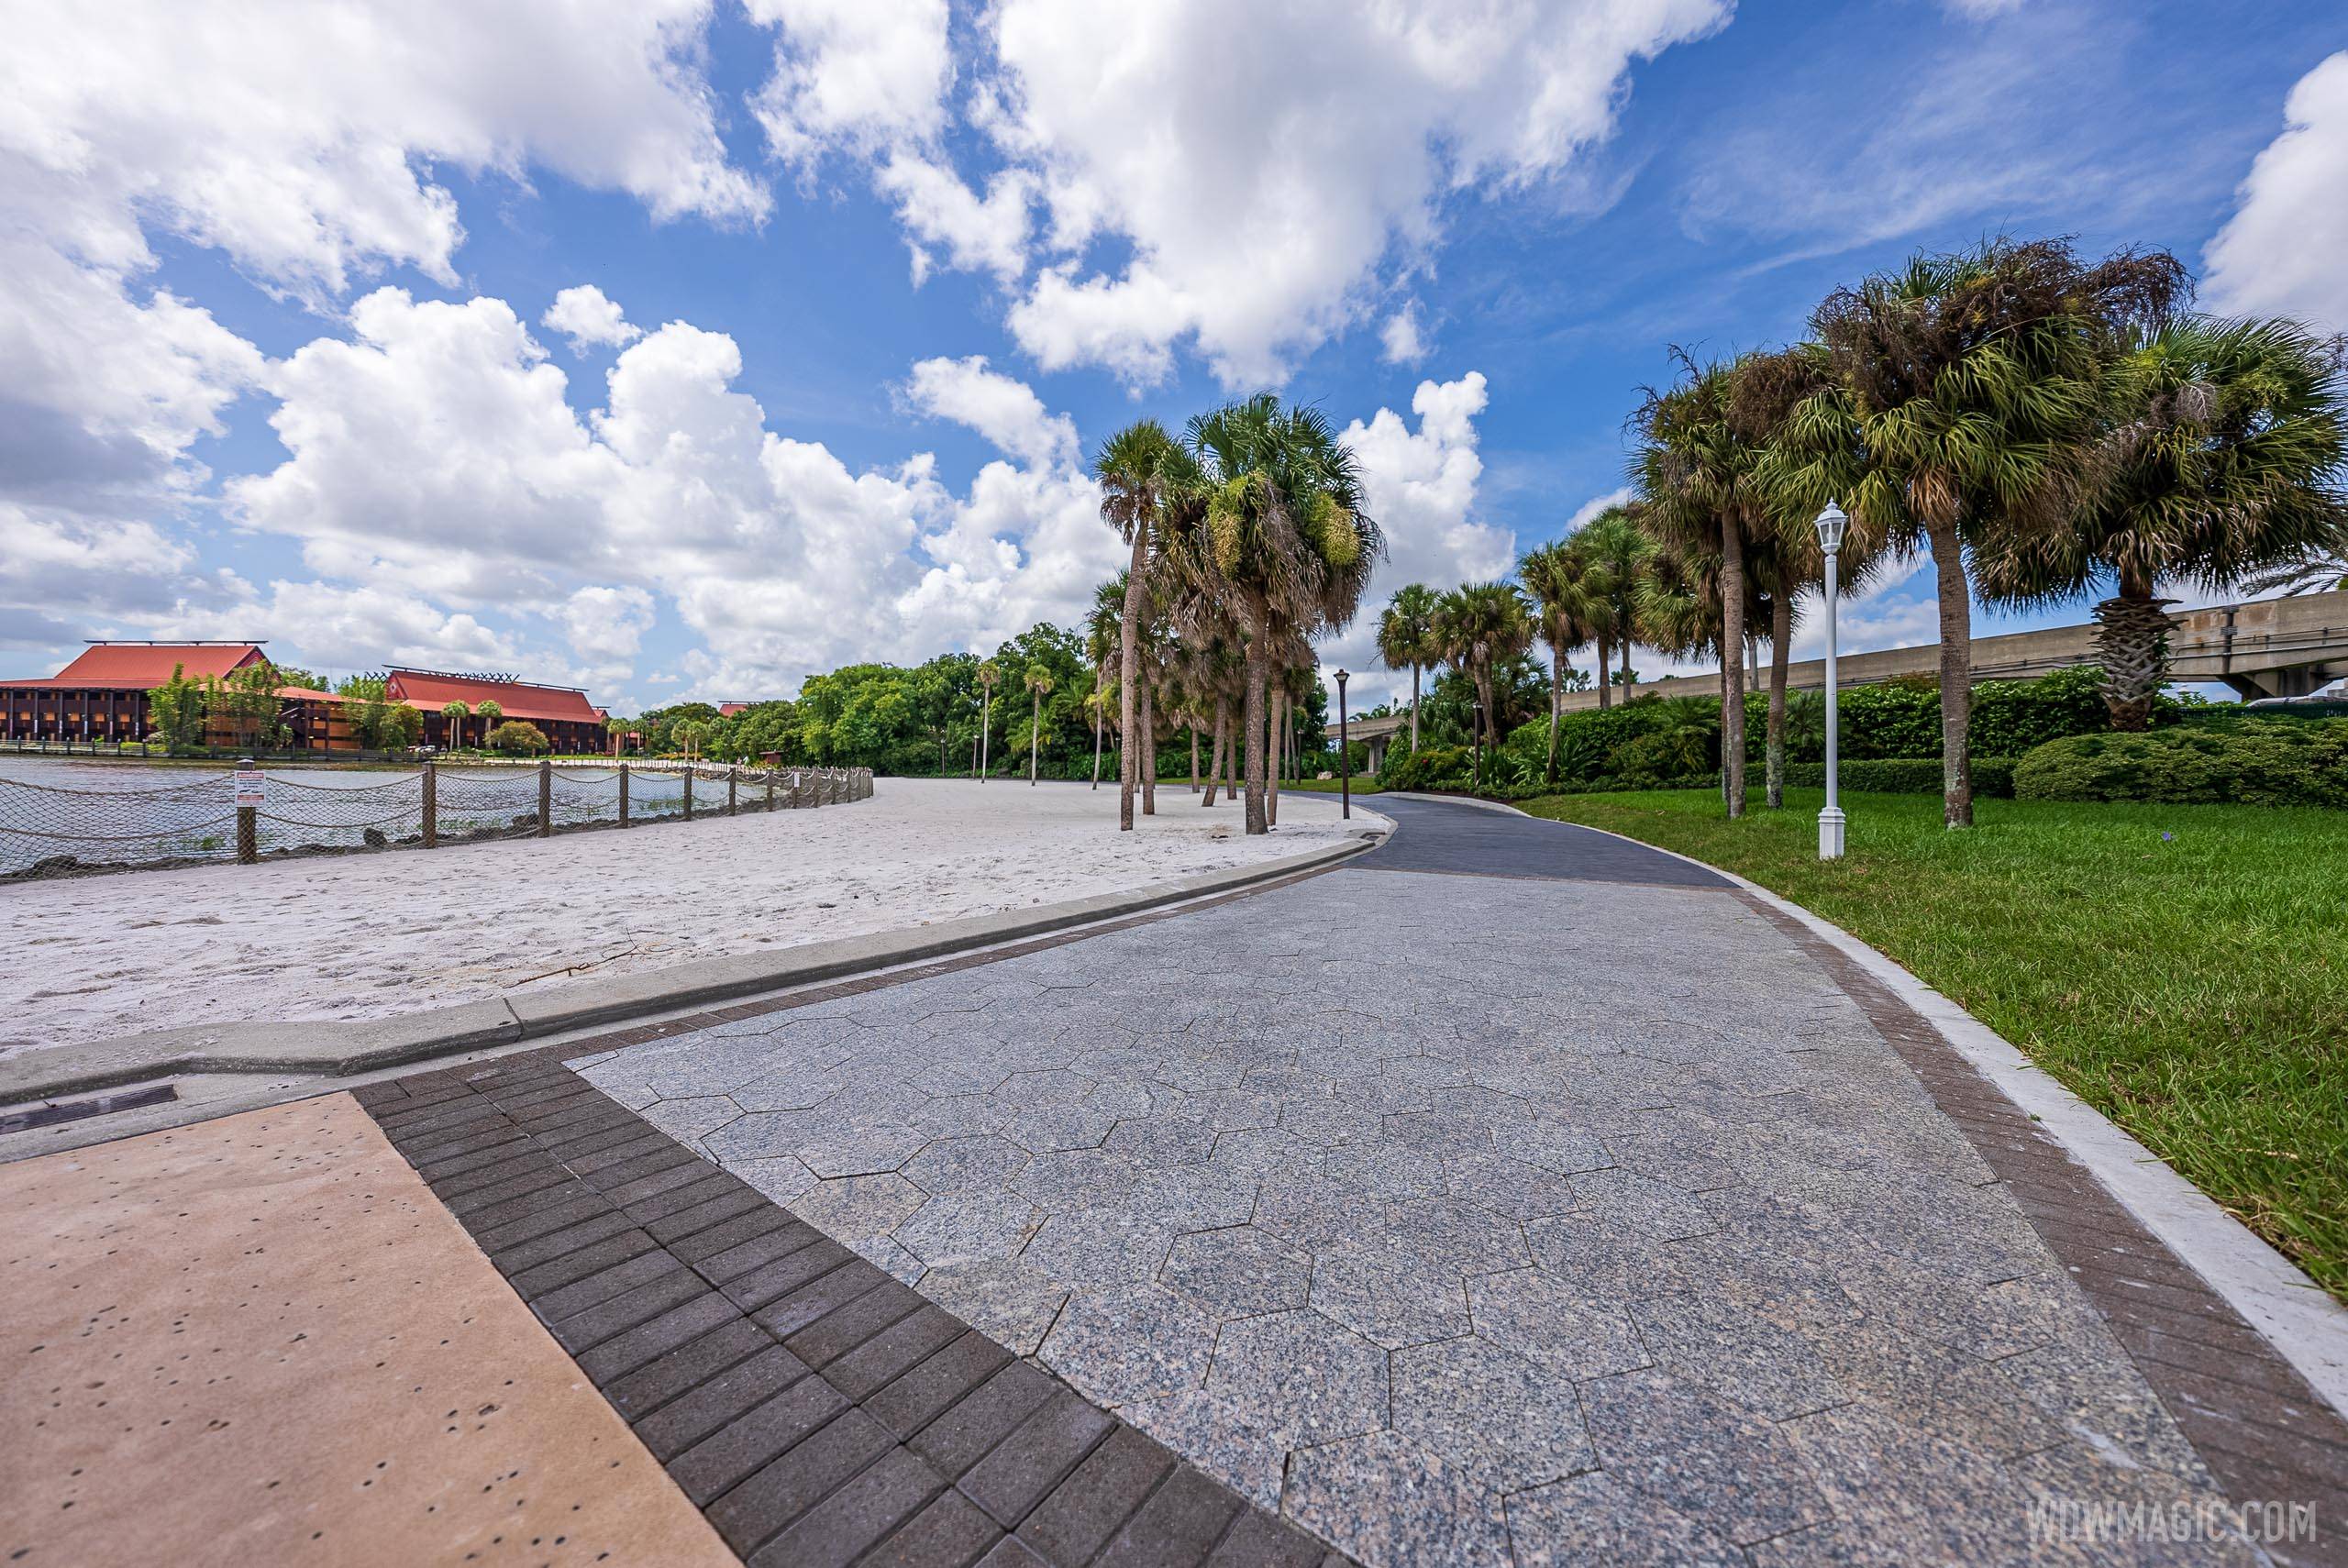 Polynesian Resort to Grand Floridian Walkway reopened - July 13 2021